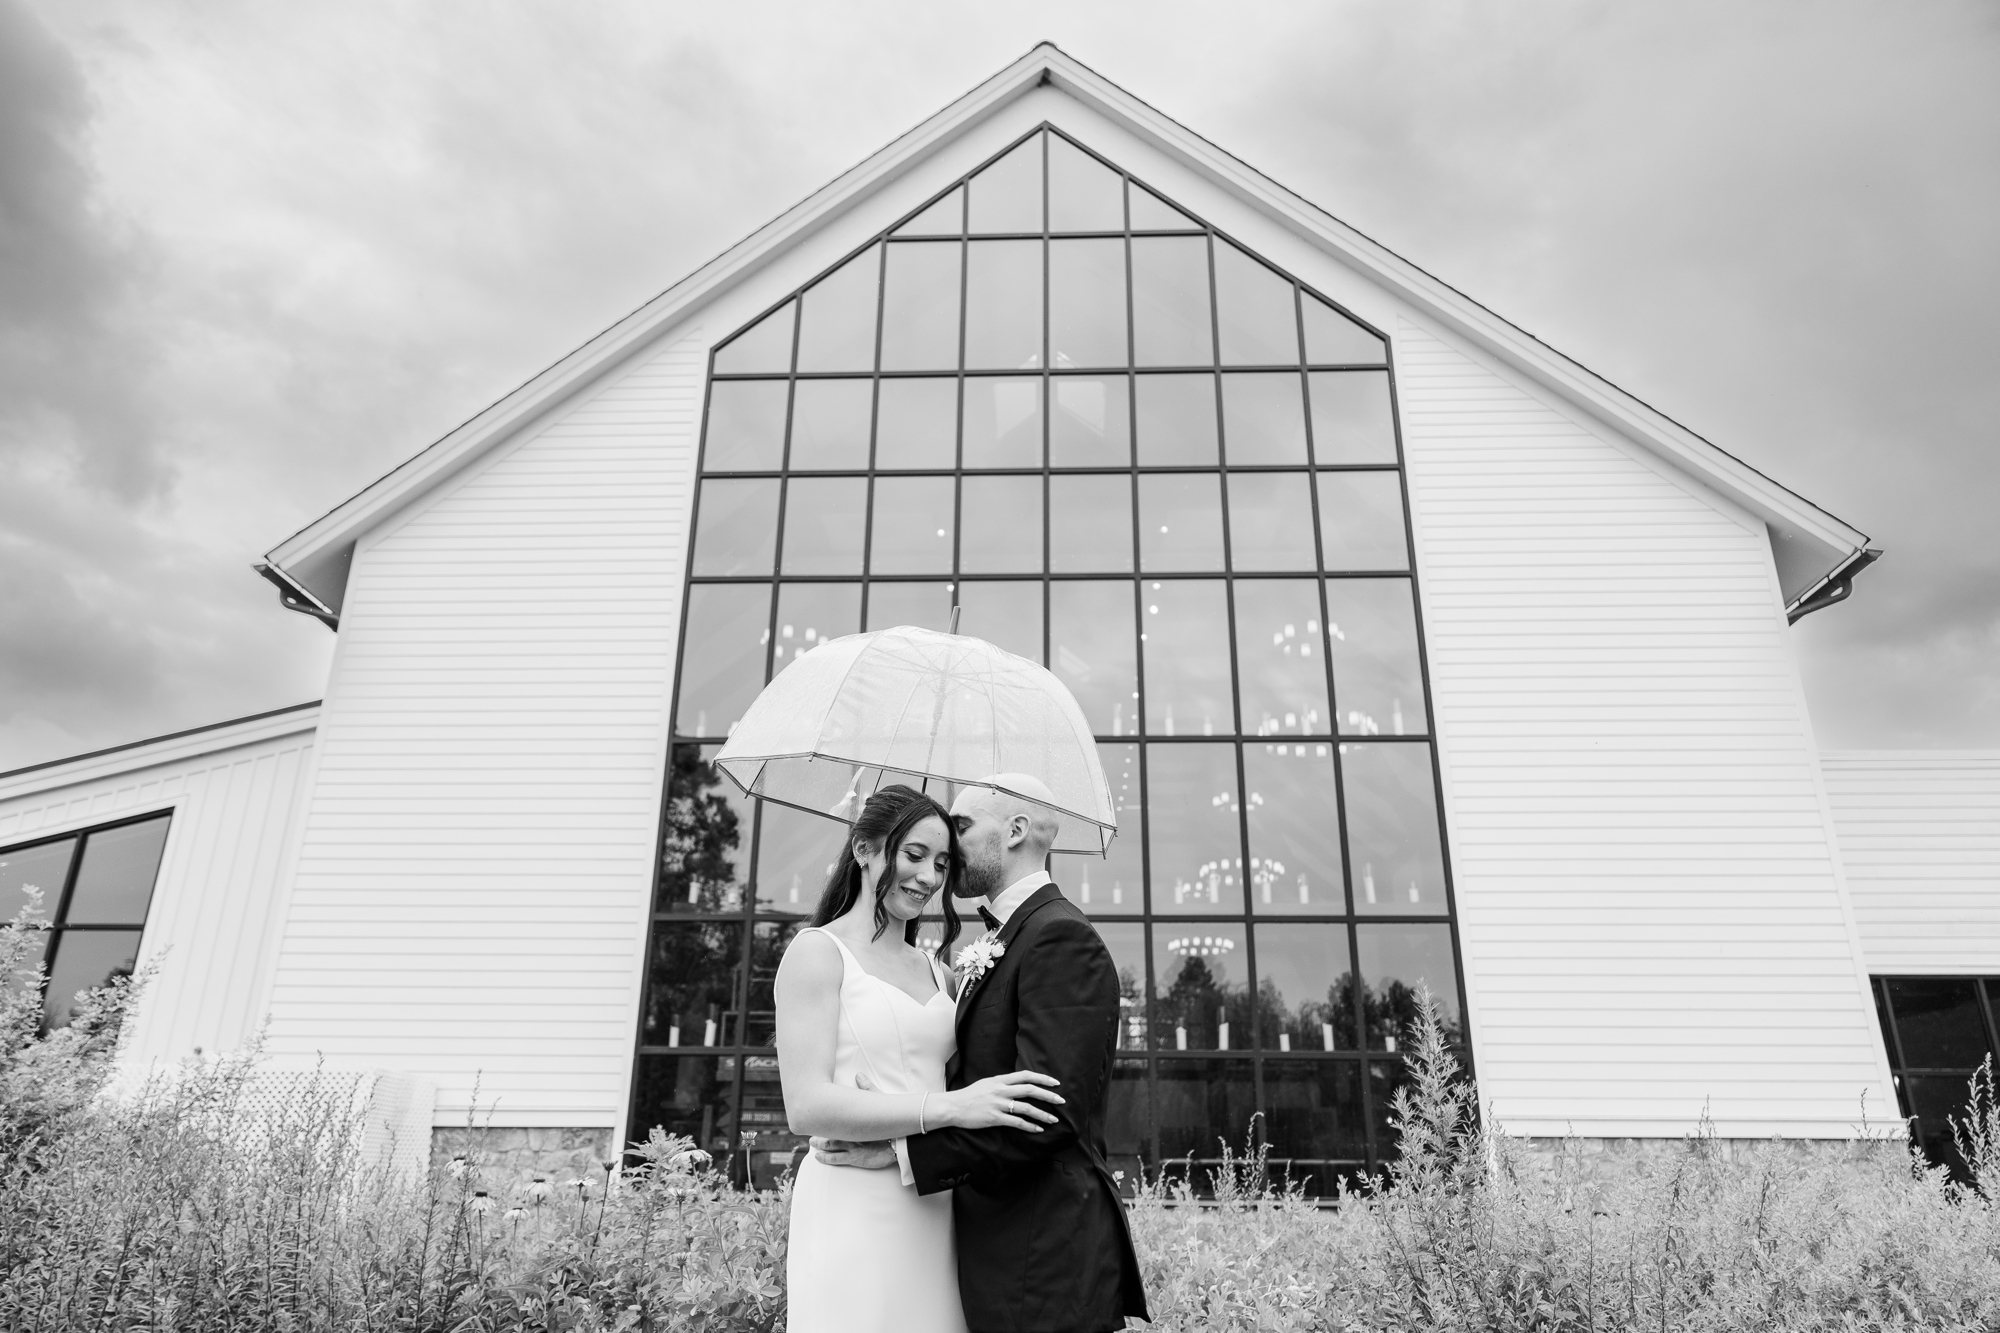 Authentic Wedding at Crossed Keys Estate in Andover, NJ